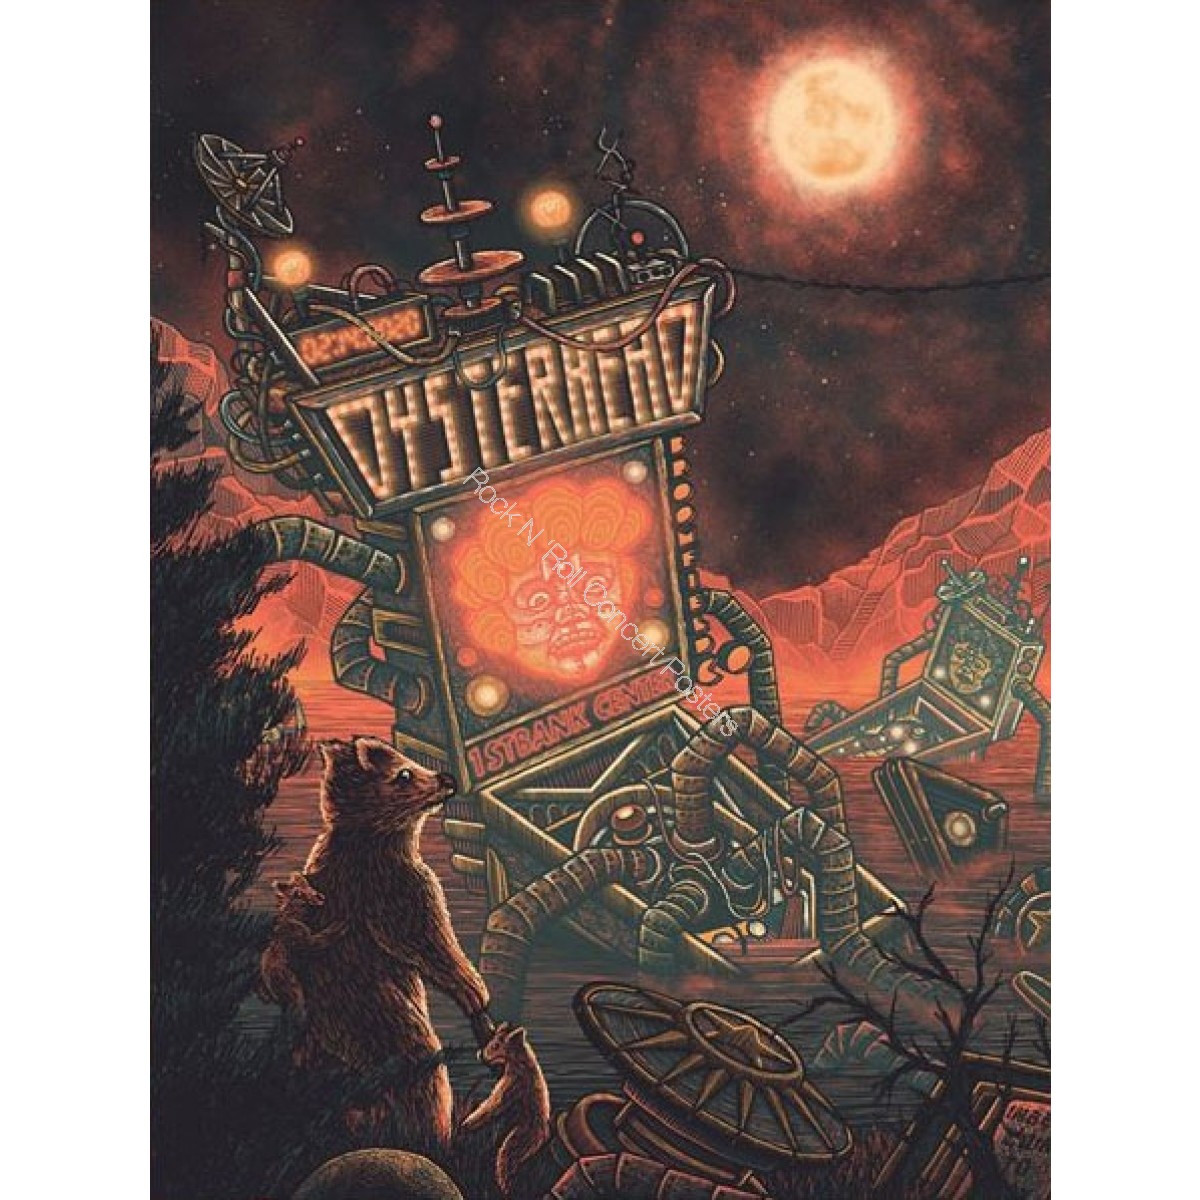 - Center 500 Sale Oysterhead Silkscreen Oysterhead | Concert Broomfield | Colorado Concert S/N 1STBANK For - Posters edition Concert Posters Official 2/14/20 RRCP of Poster